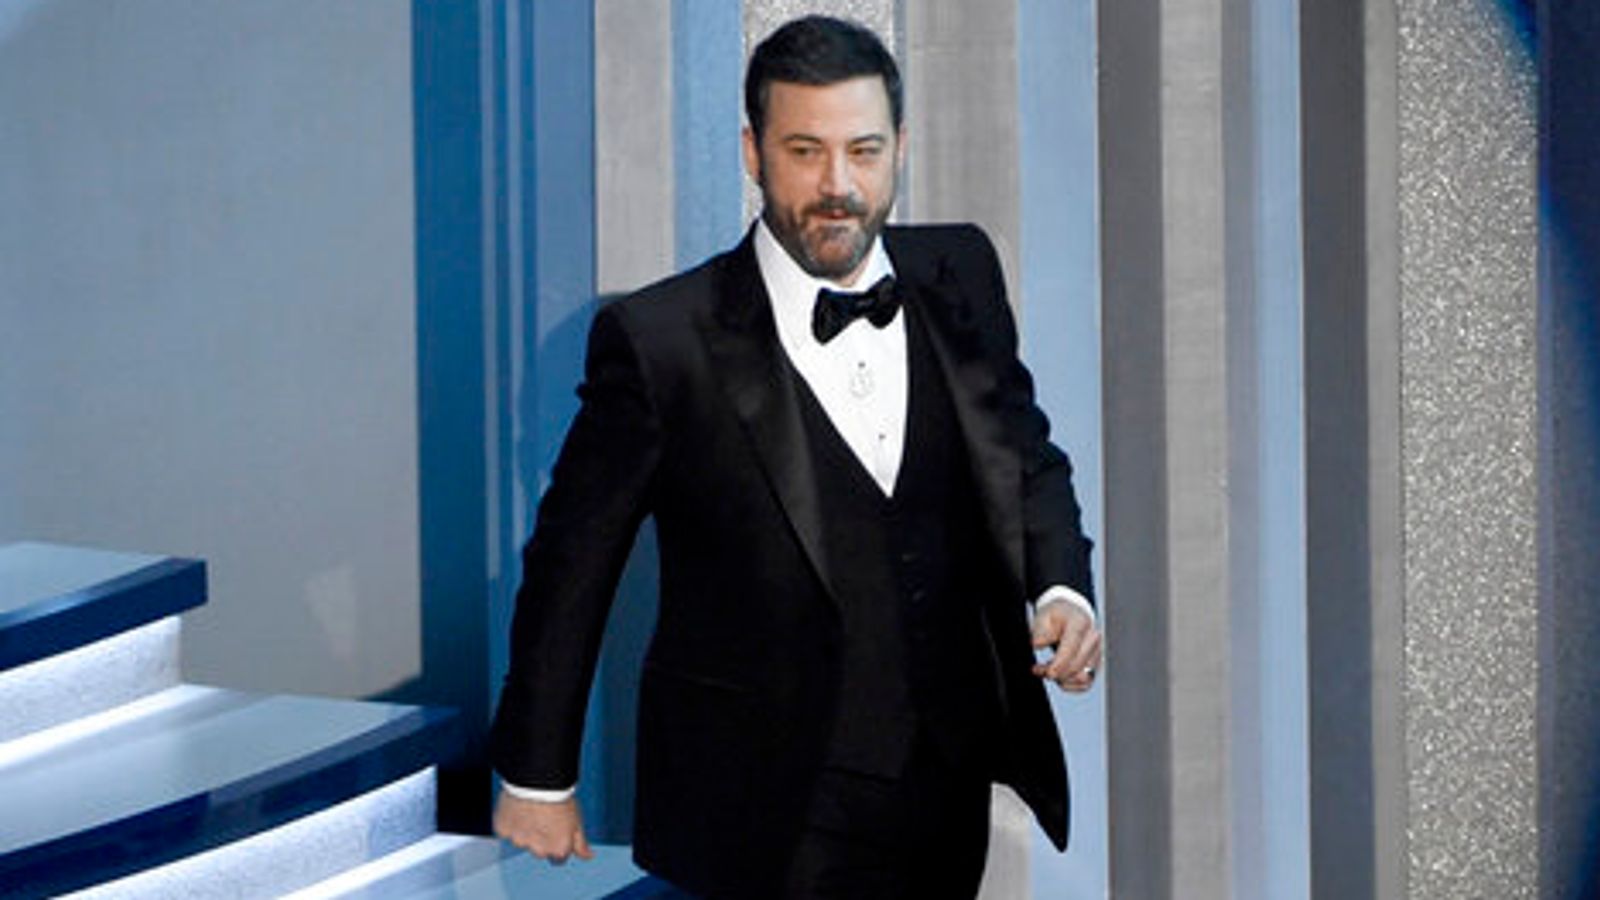 Jimmy Kimmel to host Oscars in 2023 - and will be 'funny and ready for anything'